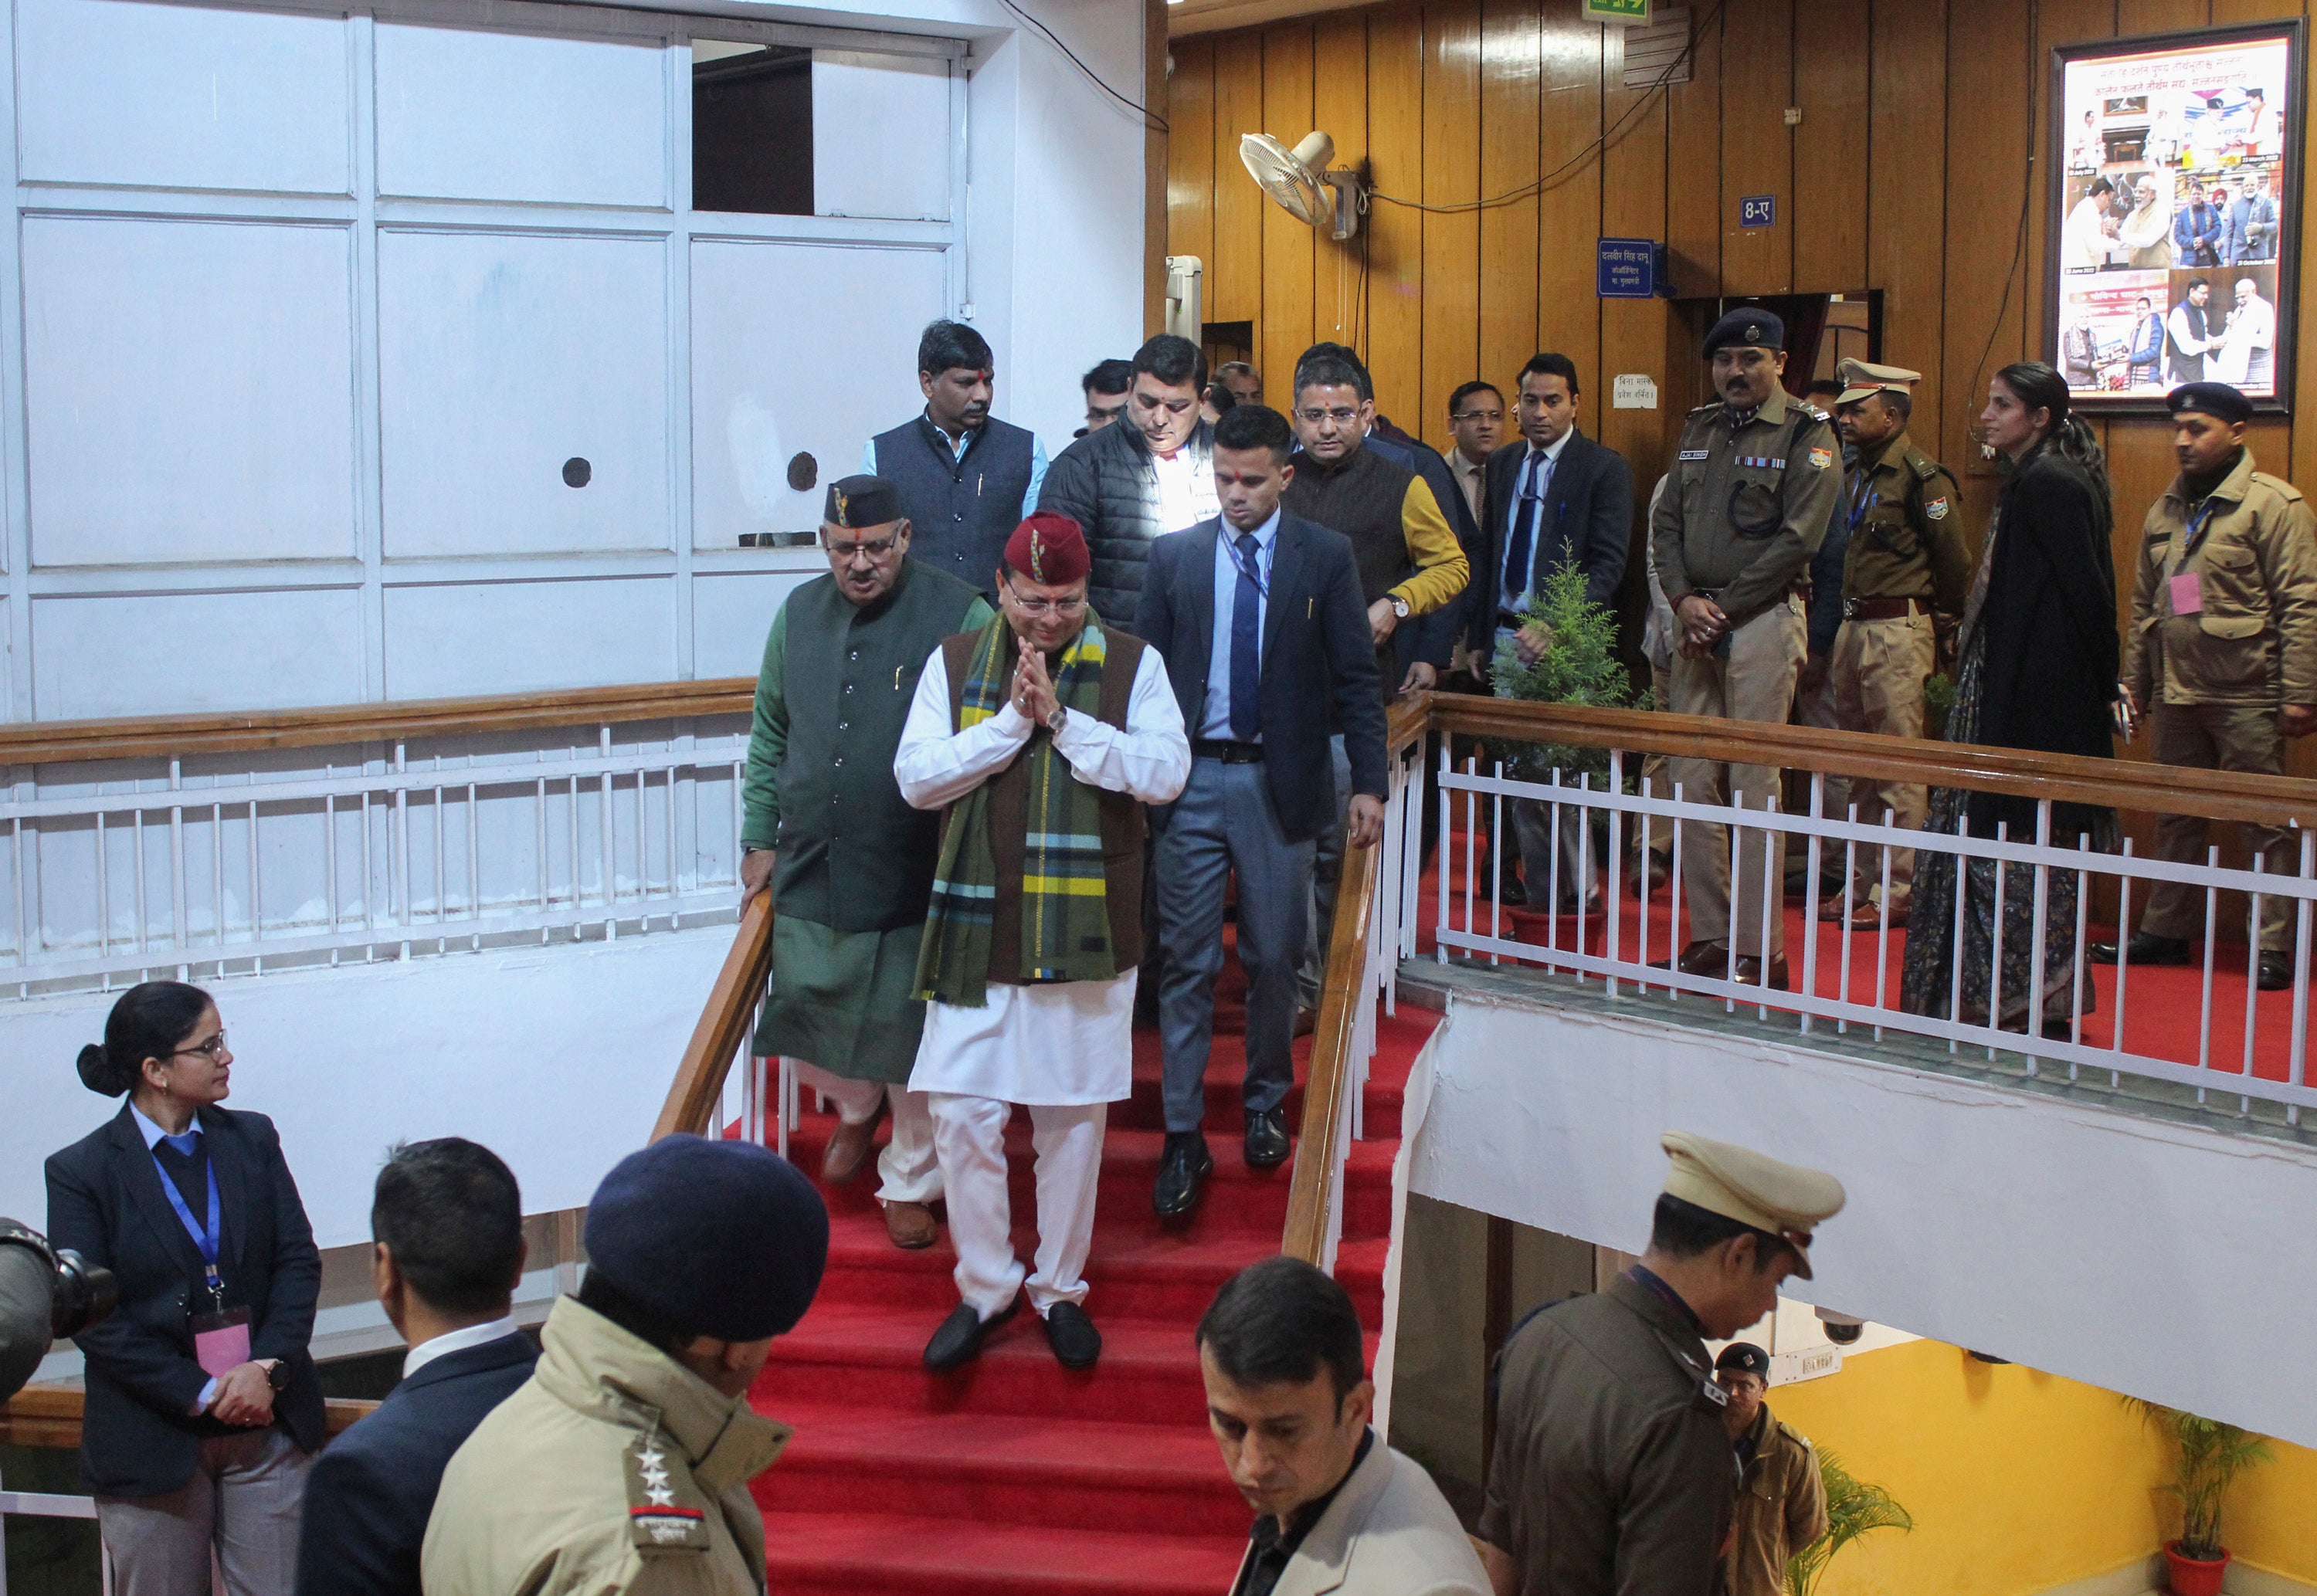 Uttarakhand Chief Minister Pushkar Singh Dhami, center, gestures as he arrives to attend a special session of the state assembly that passed a uniform marriage law for all religions in Dehradun